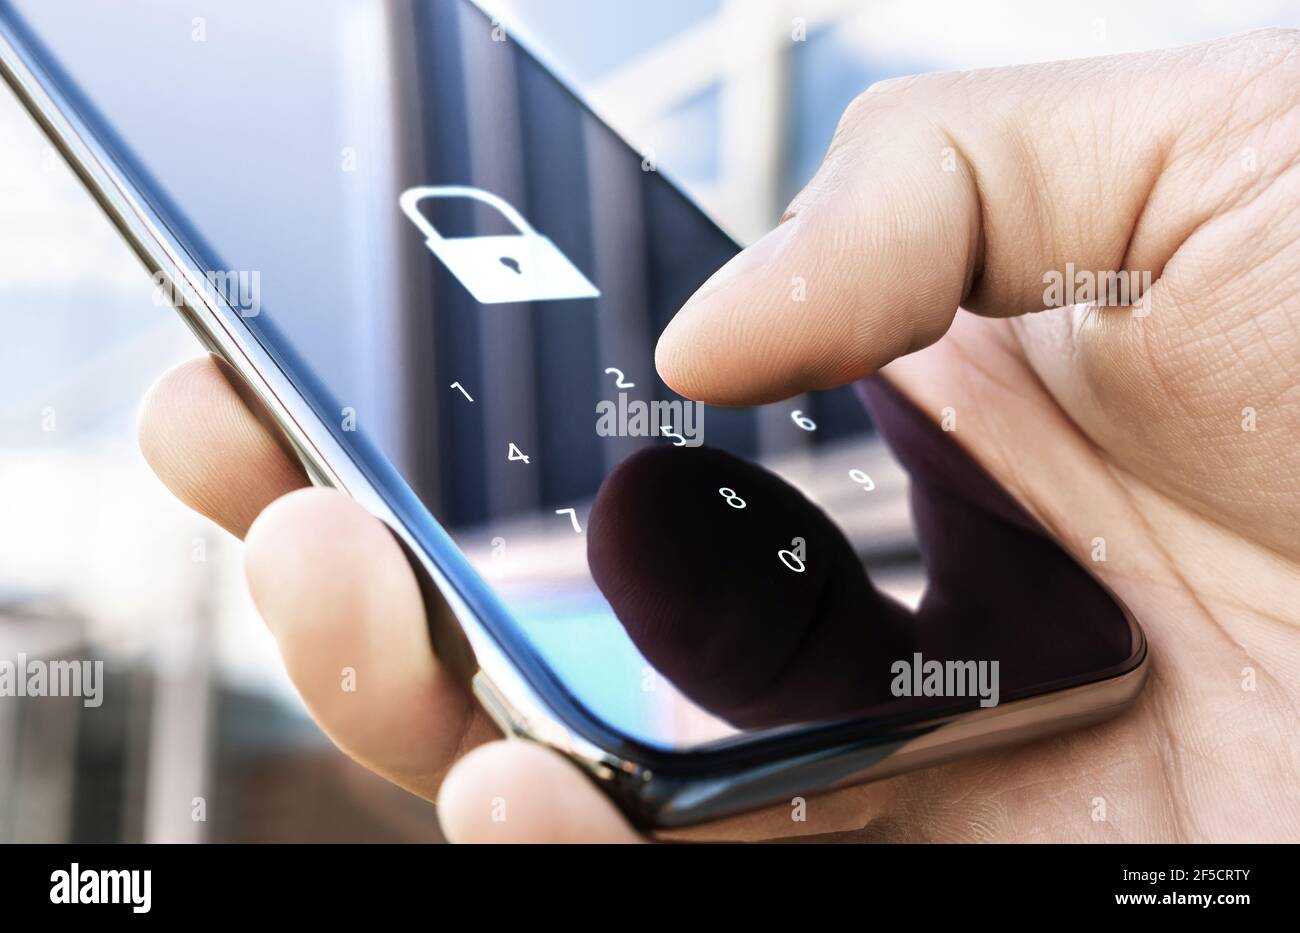 Phone lock code. Smartphone protection with 2fa (two factor authentication). Smartphone protection and security with pin number. Encrypted data. Stock Photo